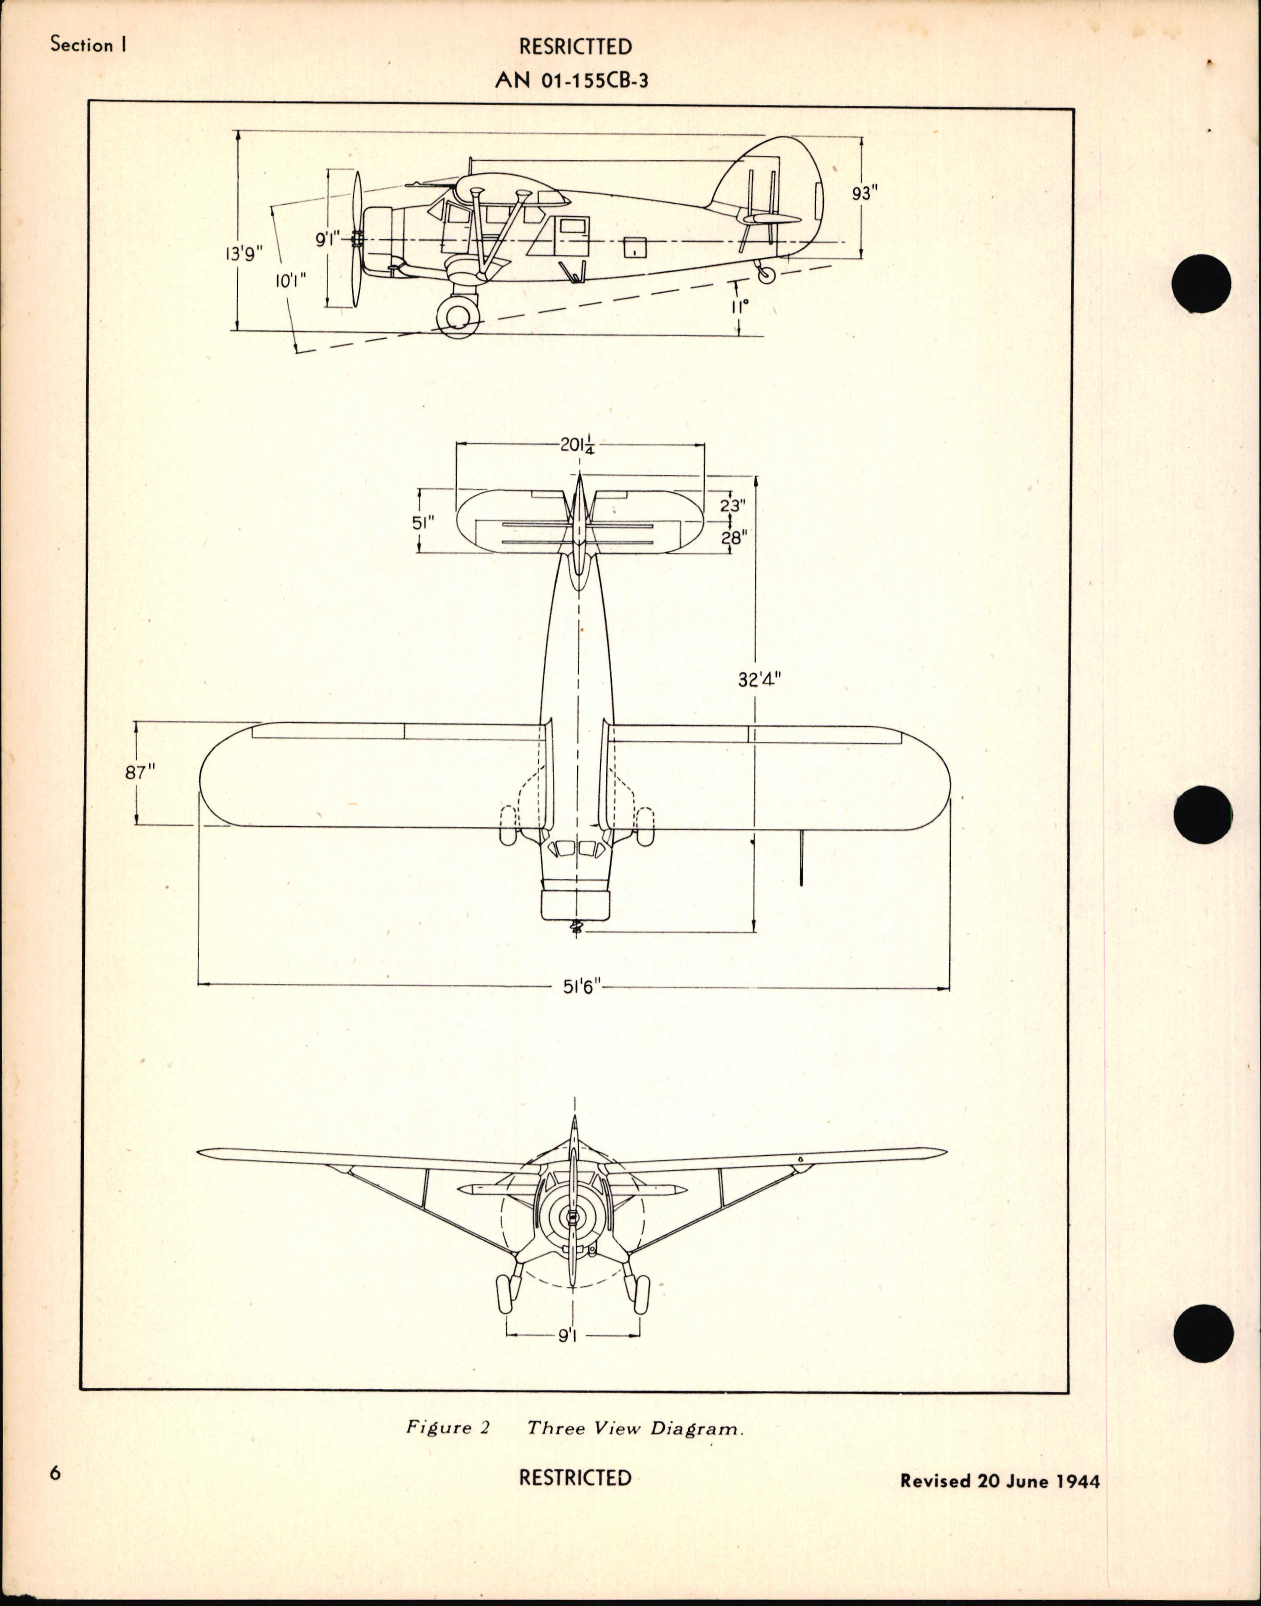 Sample page 8 from AirCorps Library document: Structural Repair Instructions for C-64A